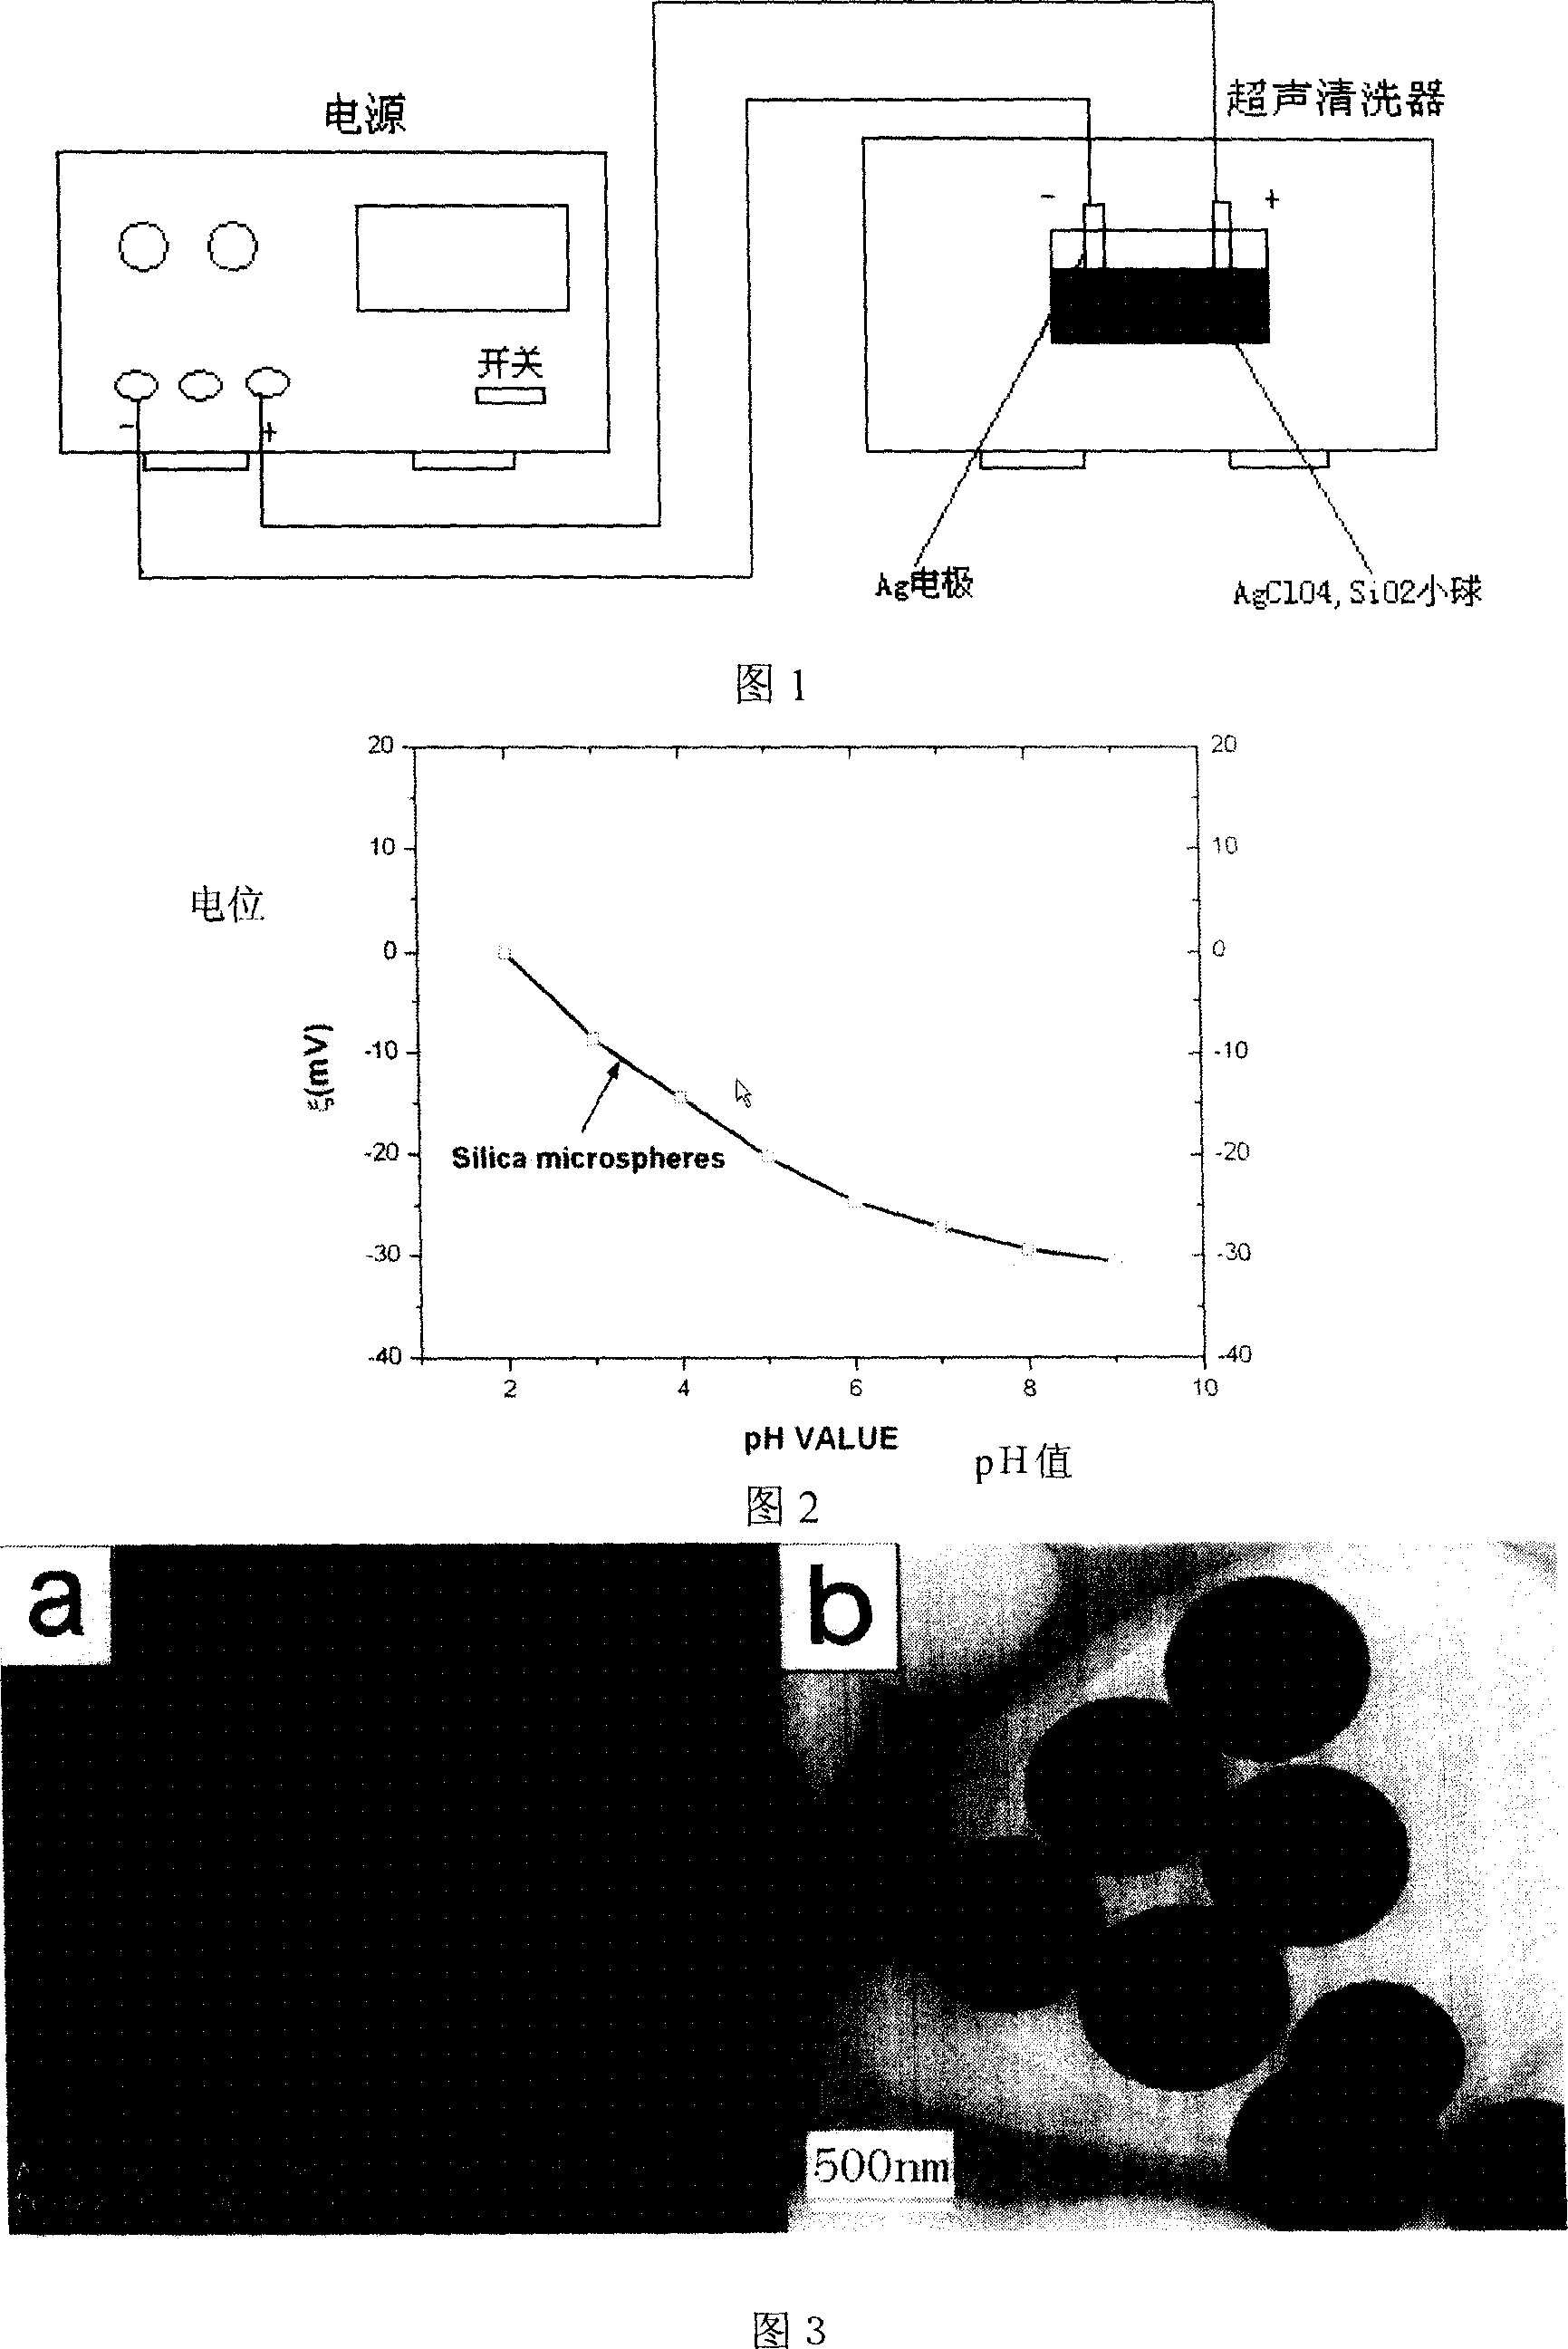 Method for preparing metal and dielectric composite grains of silicon dioxide coated by Nano silver